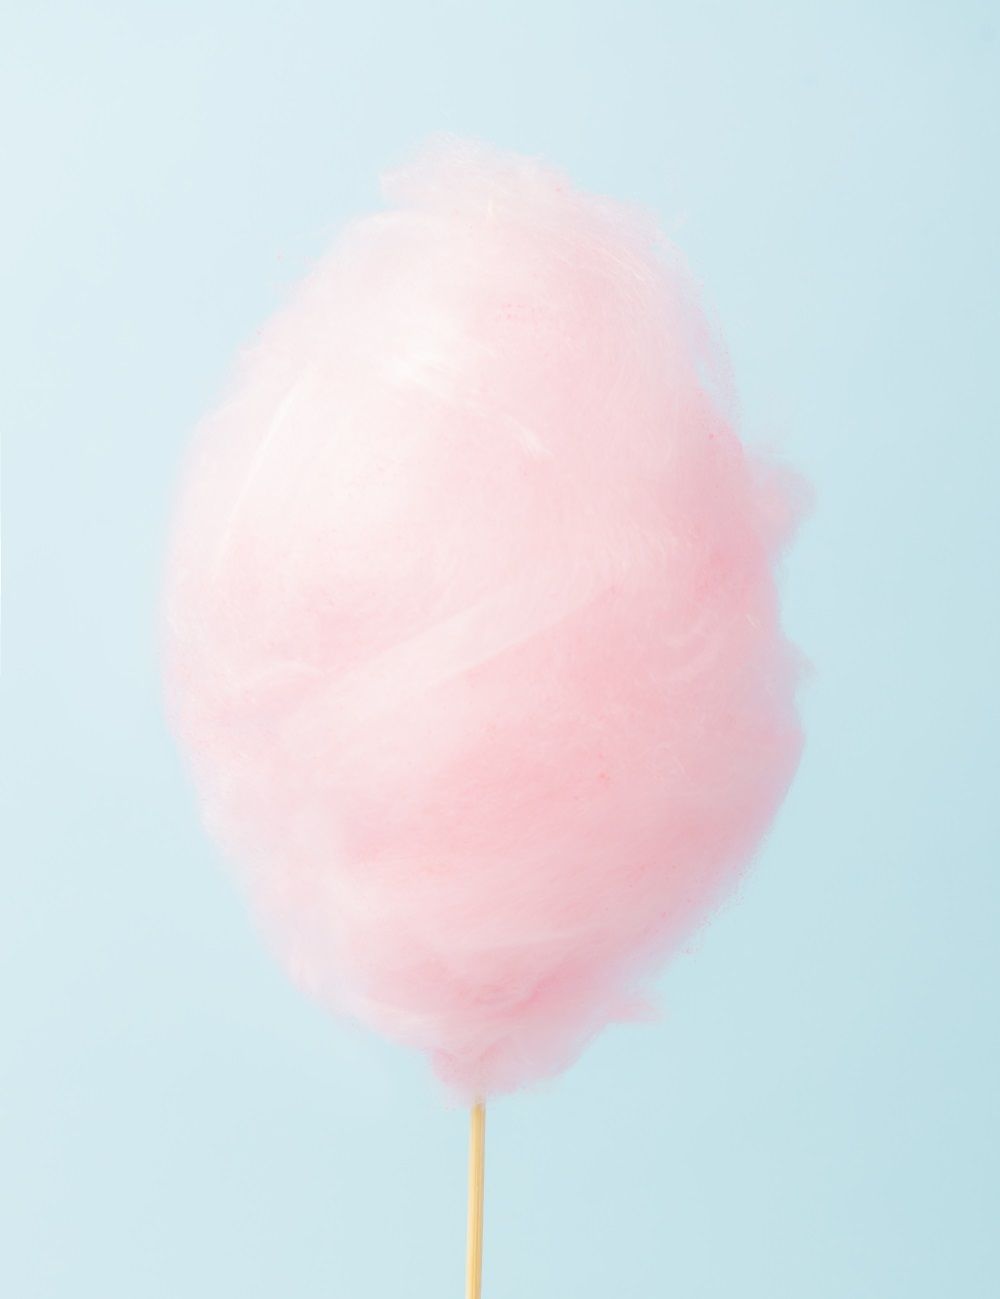 Pastel Pink Candy Wallpapers